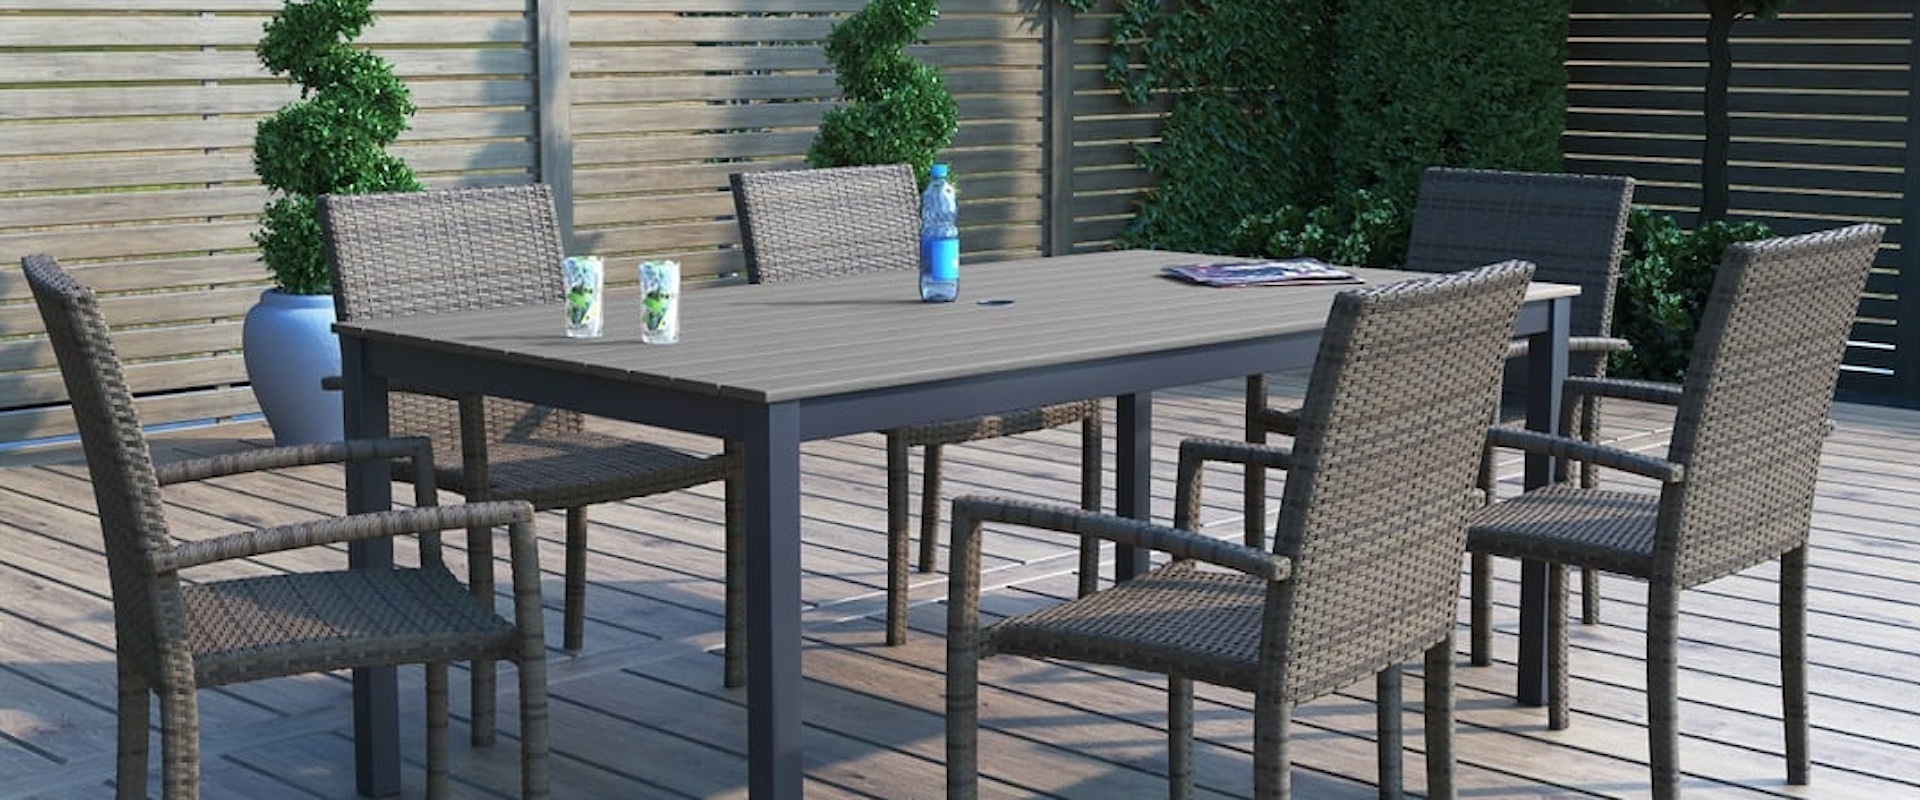 72" Outdoor Dining Table with 6 Chairs